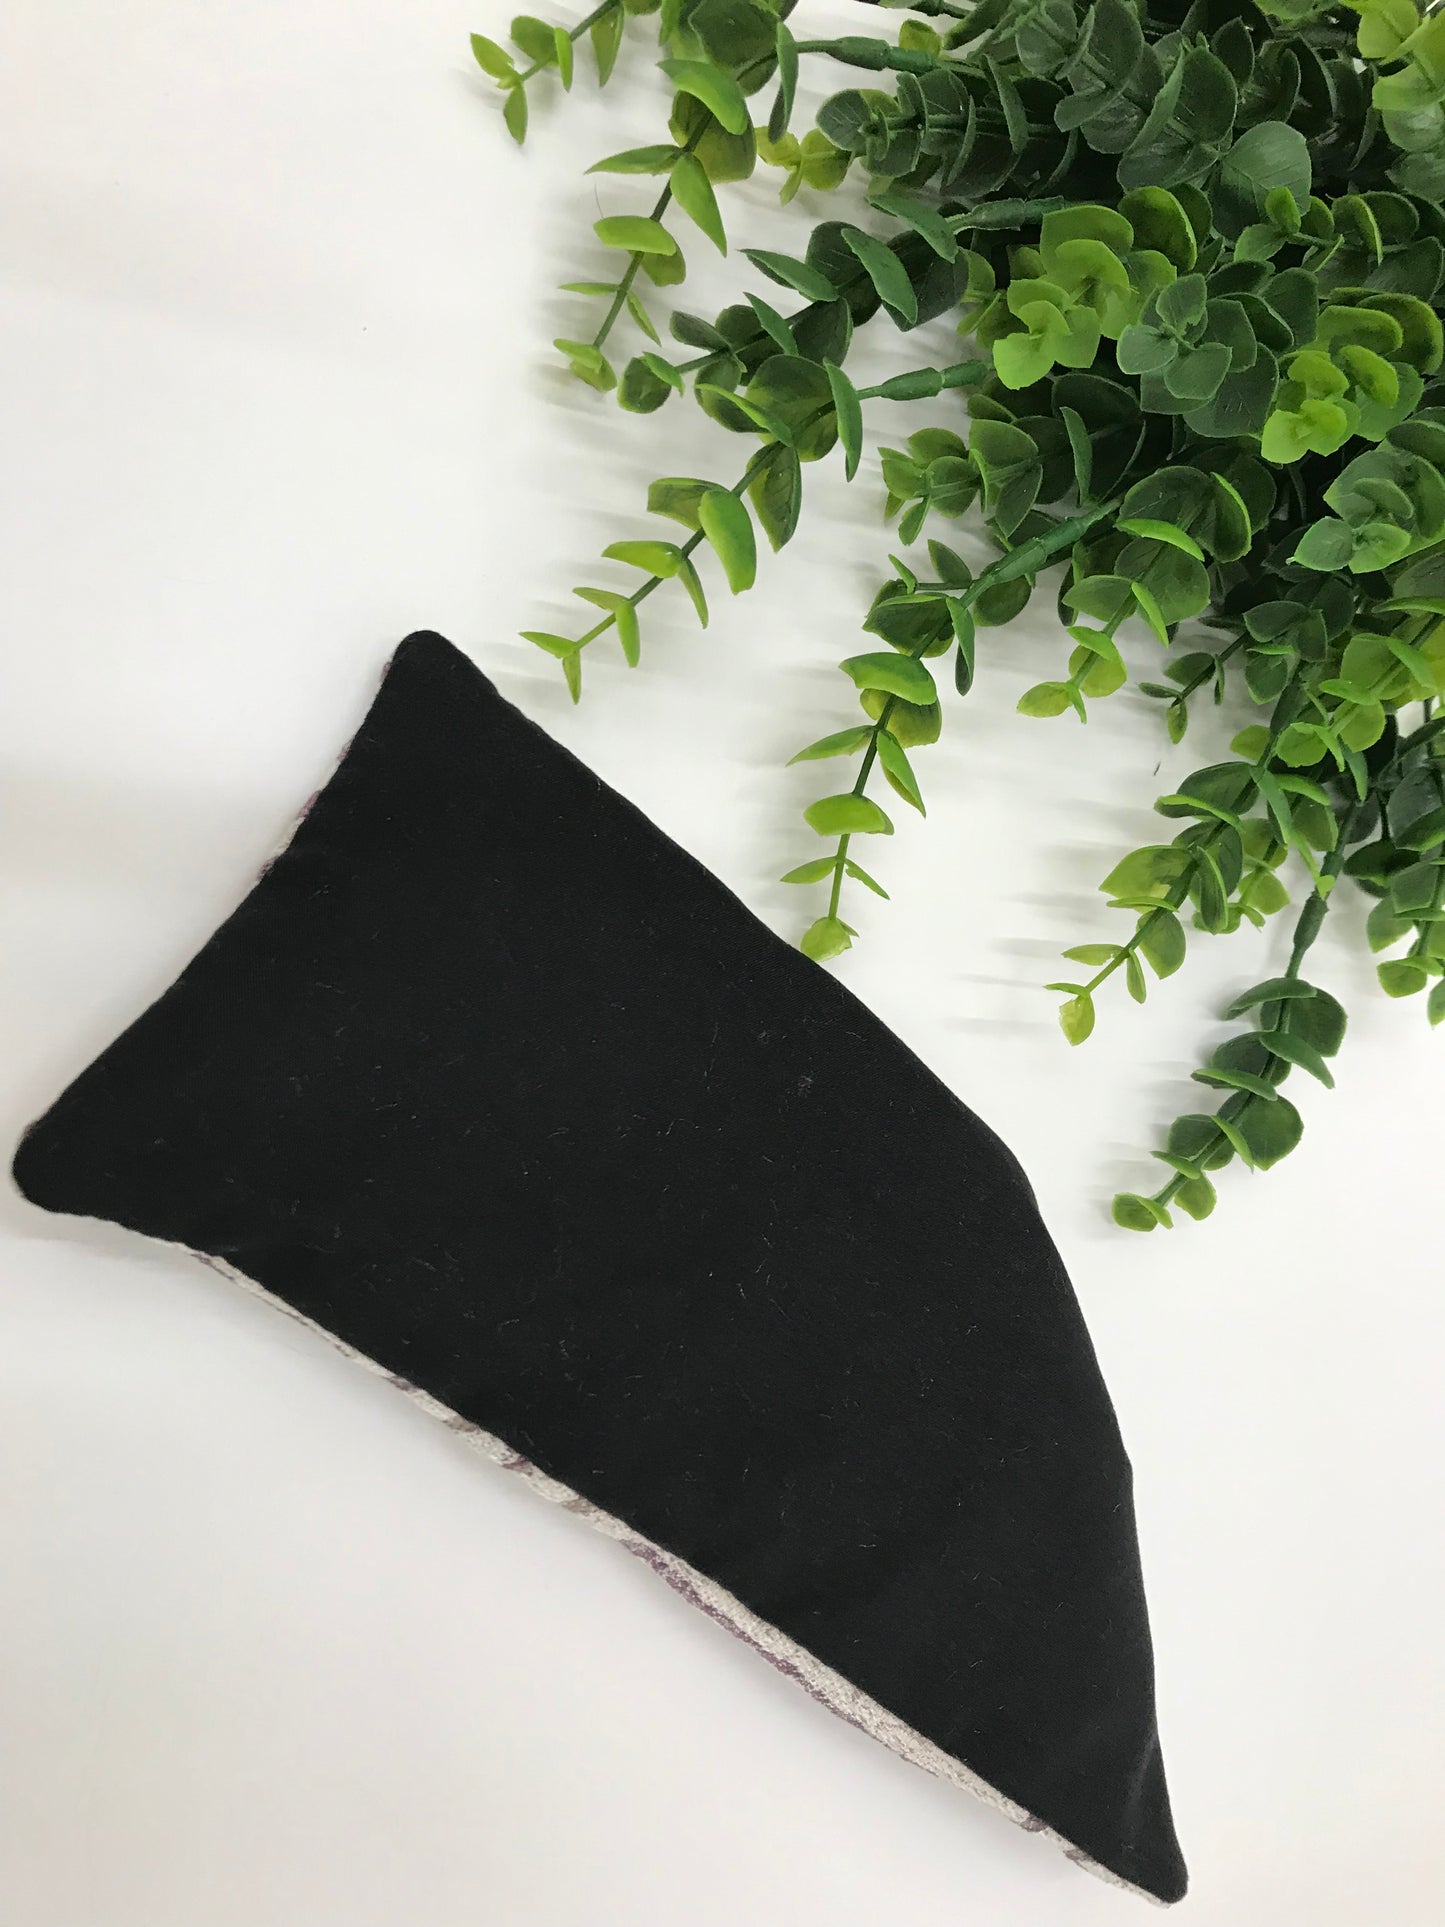 oga eye pillow, unscented, therapeutically weighted to soothe eye strain and stress or enhance your savasana. Handcrafted in Canada by My Yoga Room Elements. Purple and pearl modern print and bamboo fabric.